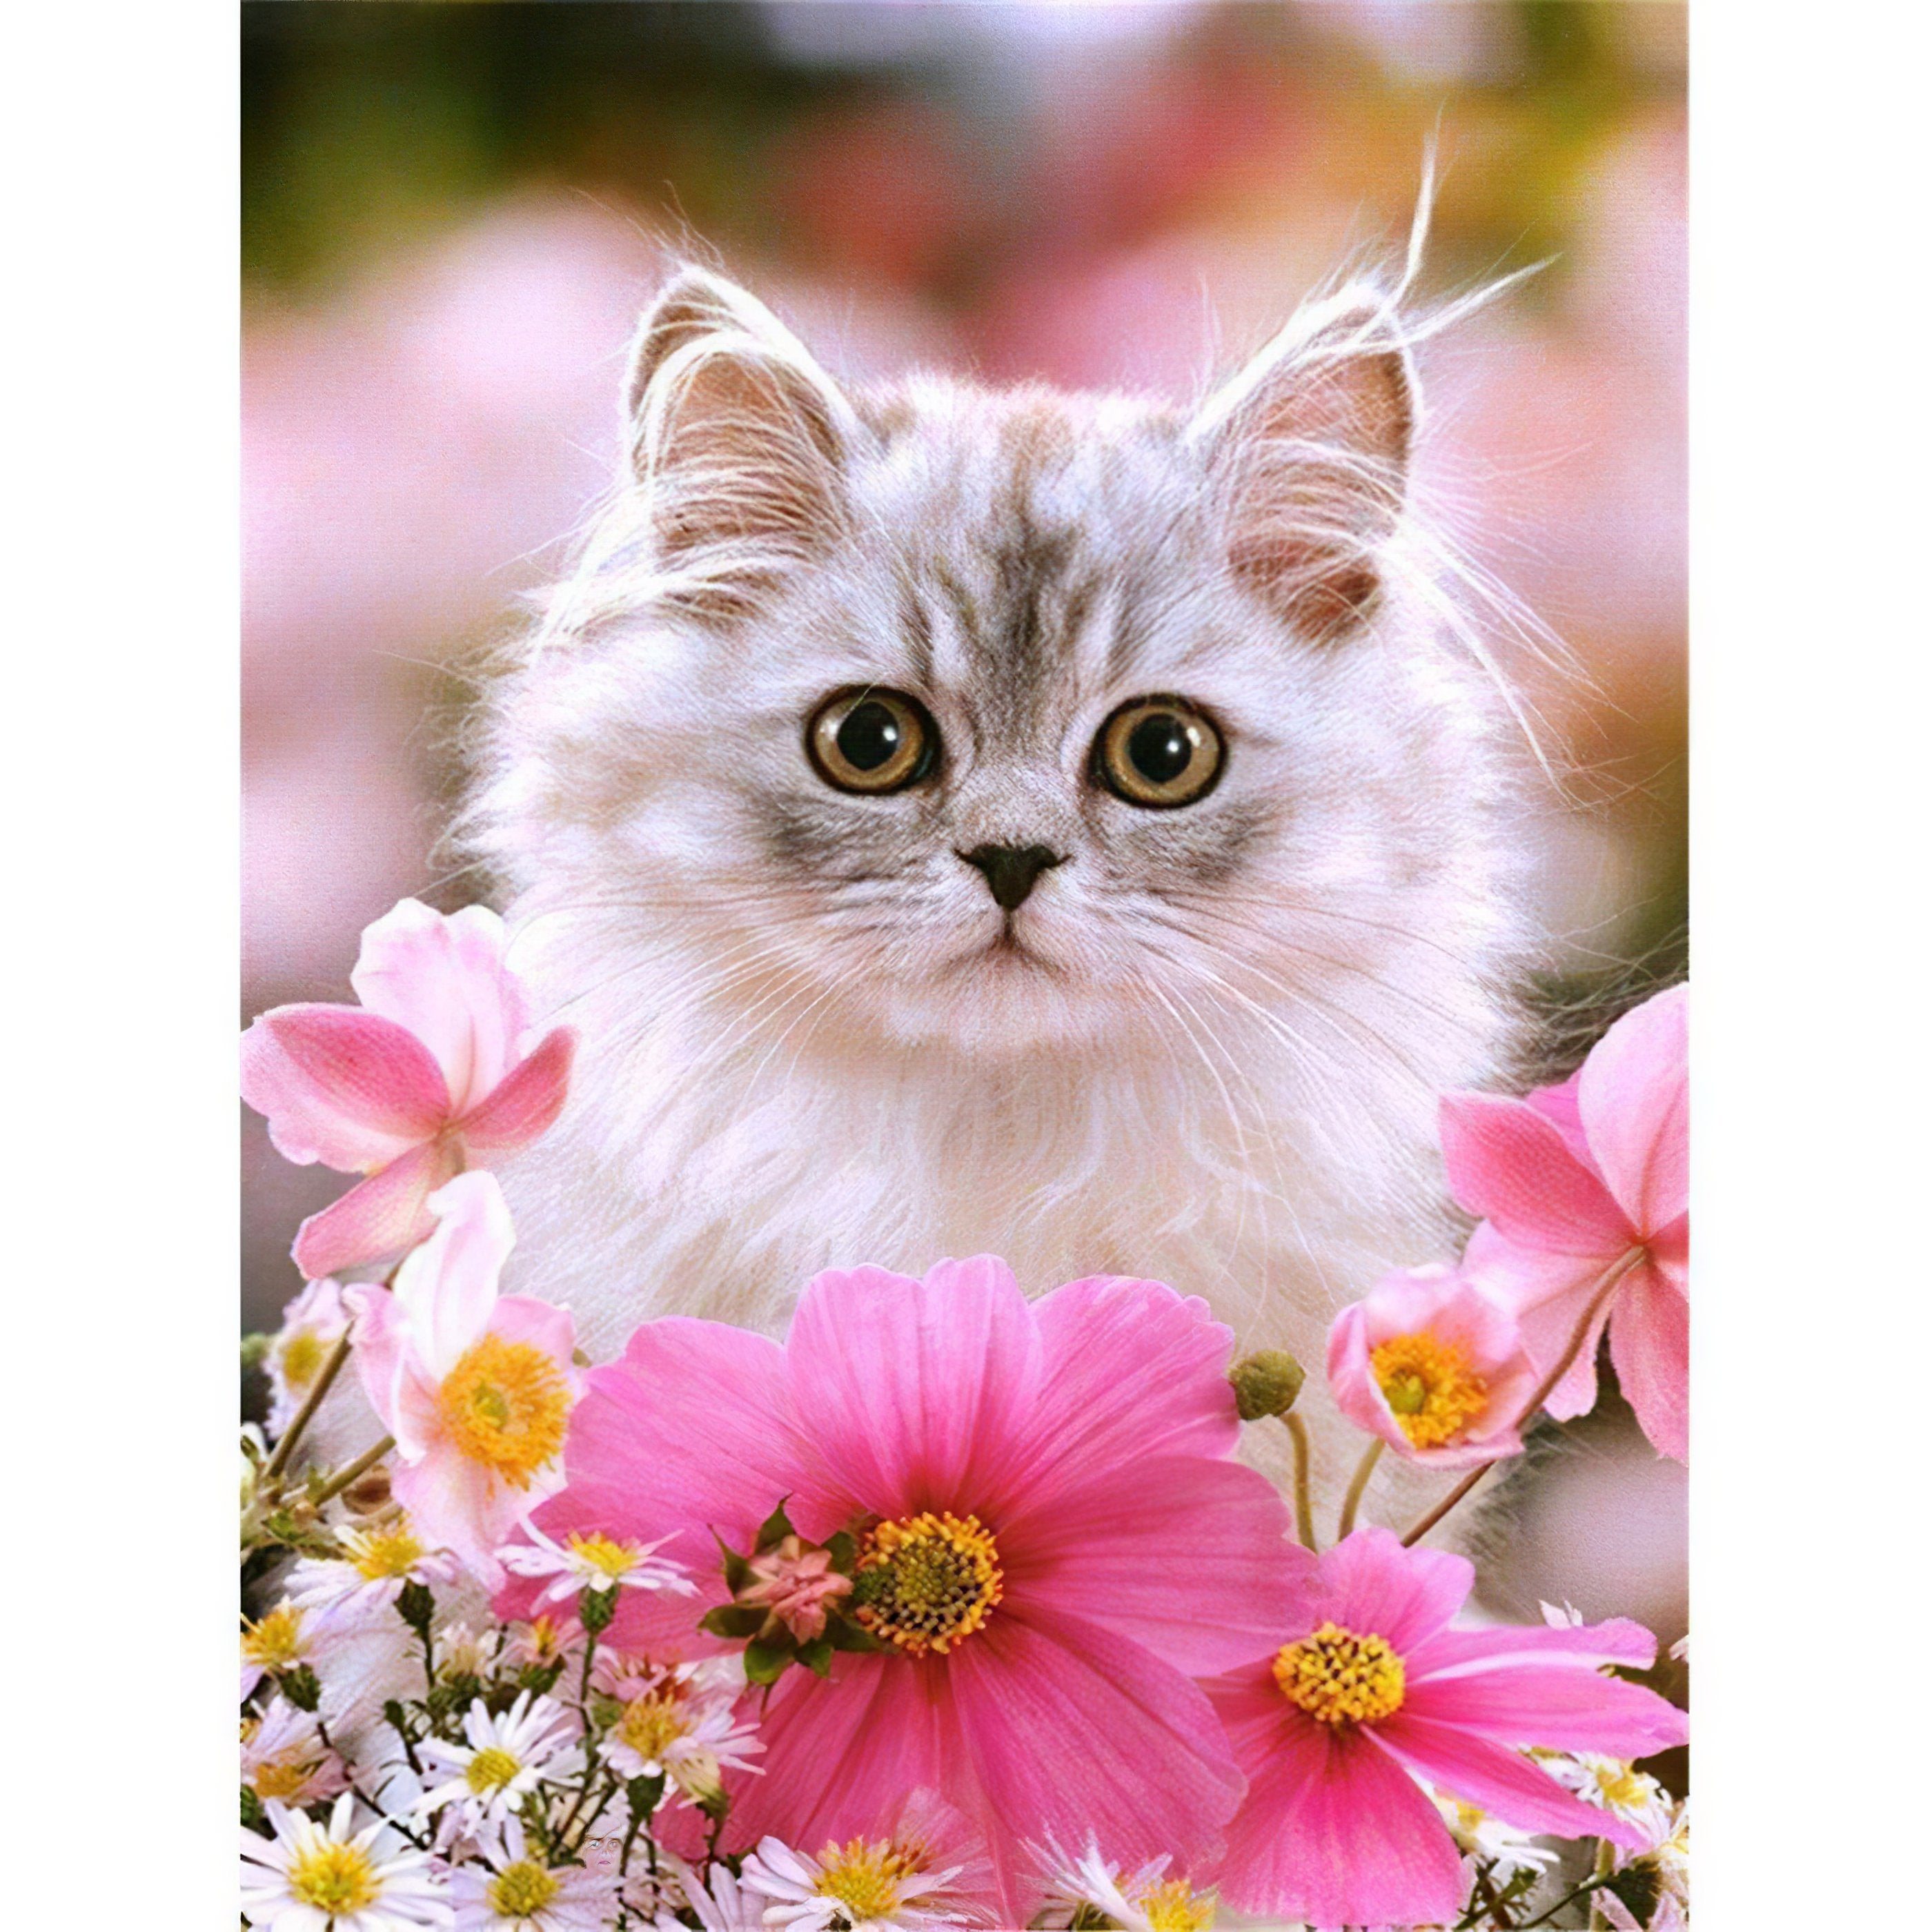 A serene cat surrounded by flowers, reflecting a peaceful coexistence with beauty. Cat With Flowers - Diamondartlove